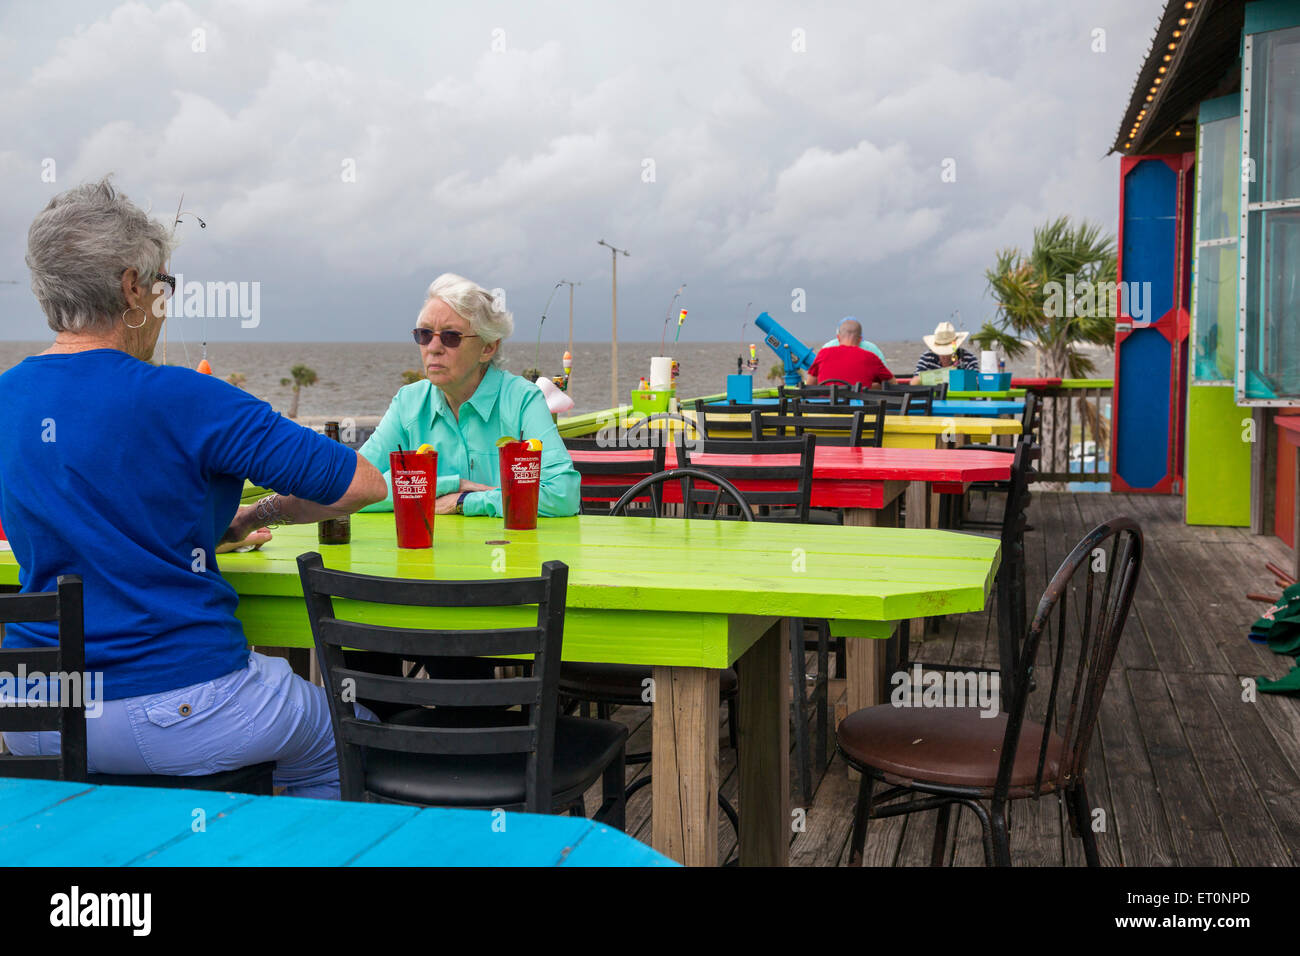 Pass Christian, Mississippi - Outdoor dining as a storm approaches at Shaggy's Pass Harbor Restaurant on the Gulf of Mexico. Stock Photo